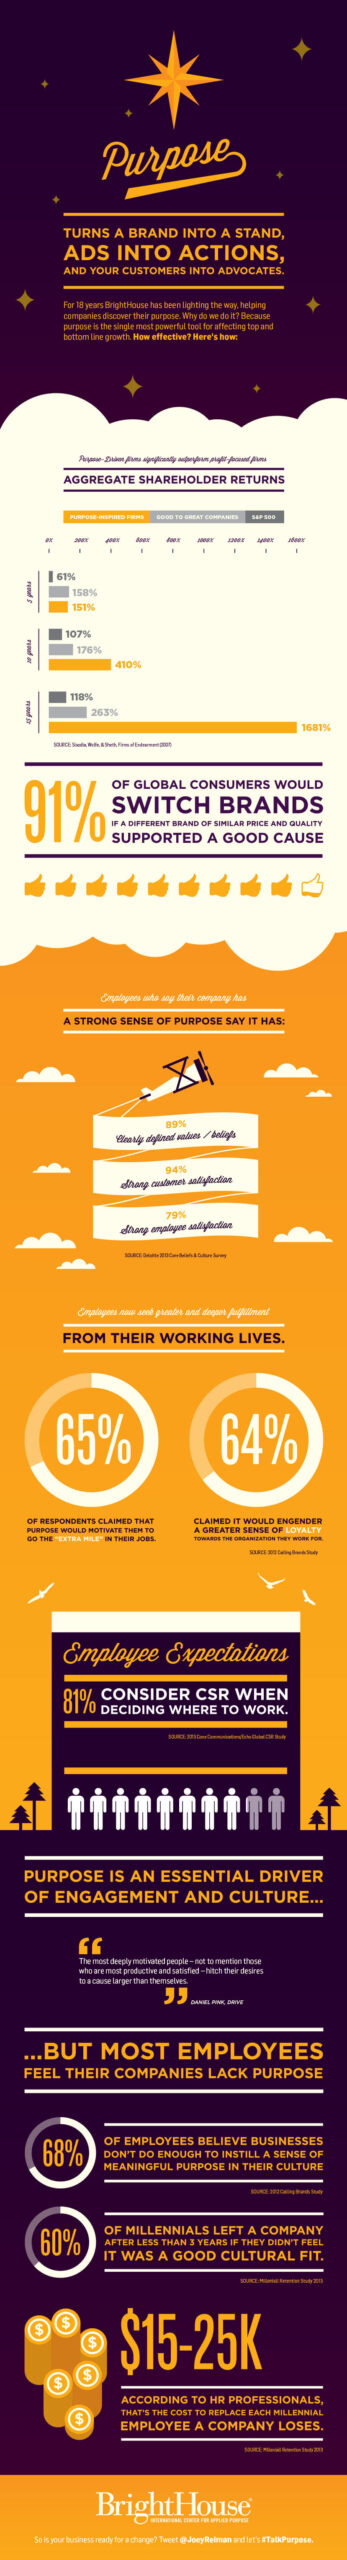 Power of Purpose Infographic BrightHouse